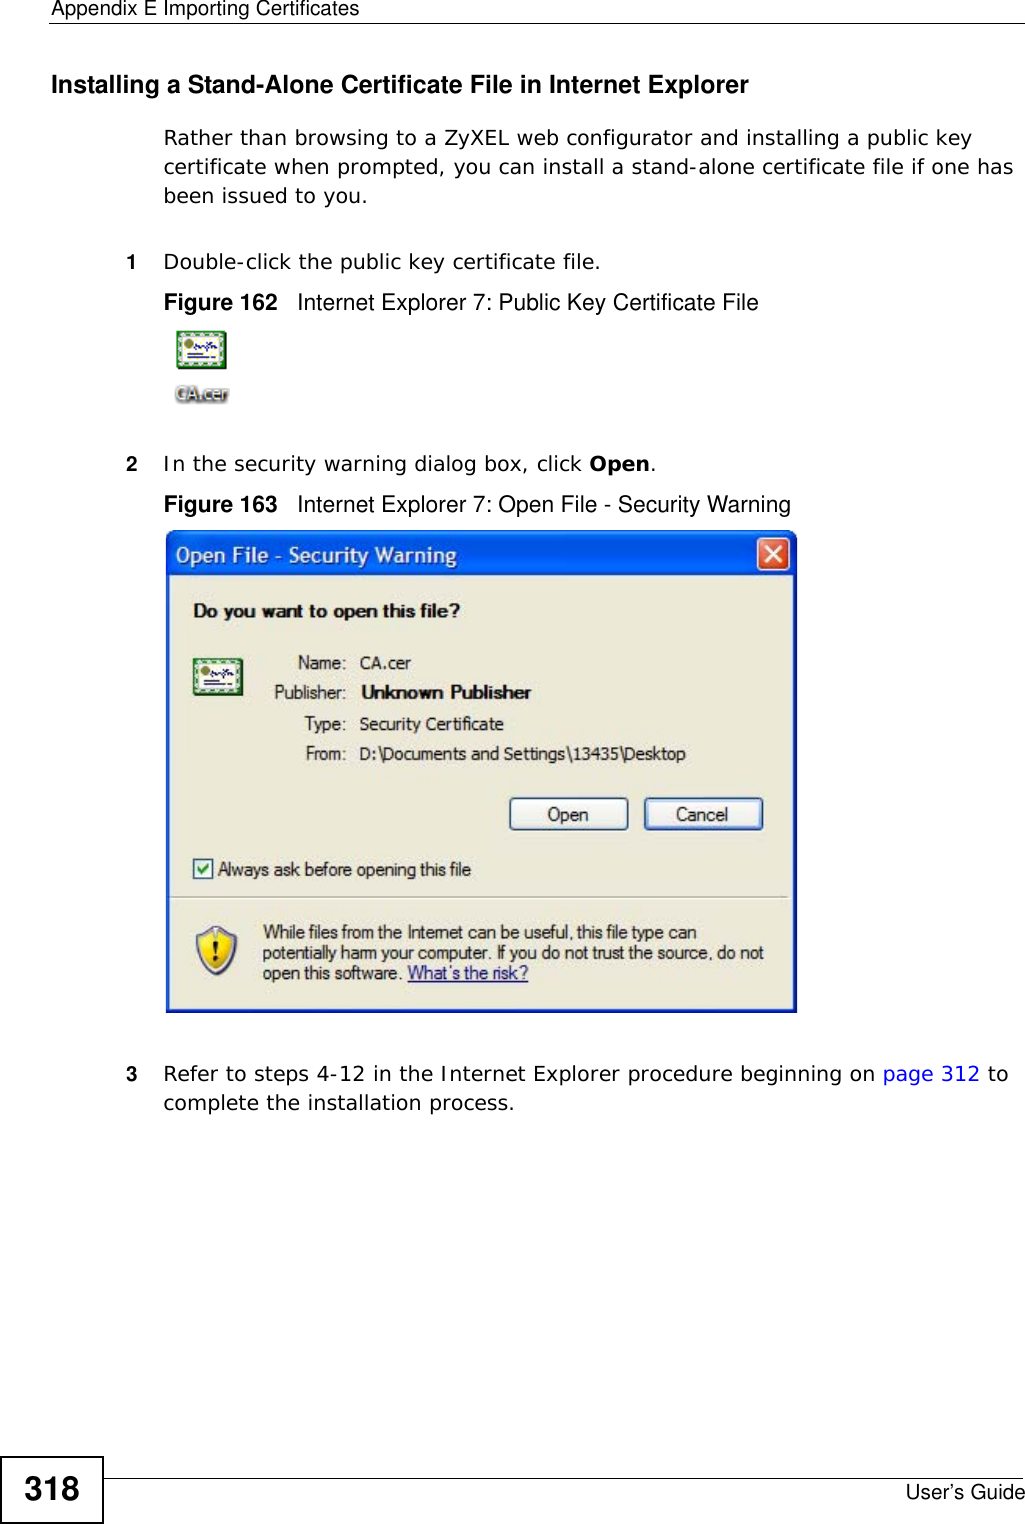 Appendix E Importing CertificatesUser’s Guide318Installing a Stand-Alone Certificate File in Internet ExplorerRather than browsing to a ZyXEL web configurator and installing a public key certificate when prompted, you can install a stand-alone certificate file if one has been issued to you.1Double-click the public key certificate file.Figure 162   Internet Explorer 7: Public Key Certificate File2In the security warning dialog box, click Open.Figure 163   Internet Explorer 7: Open File - Security Warning3Refer to steps 4-12 in the Internet Explorer procedure beginning on page 312 to complete the installation process.